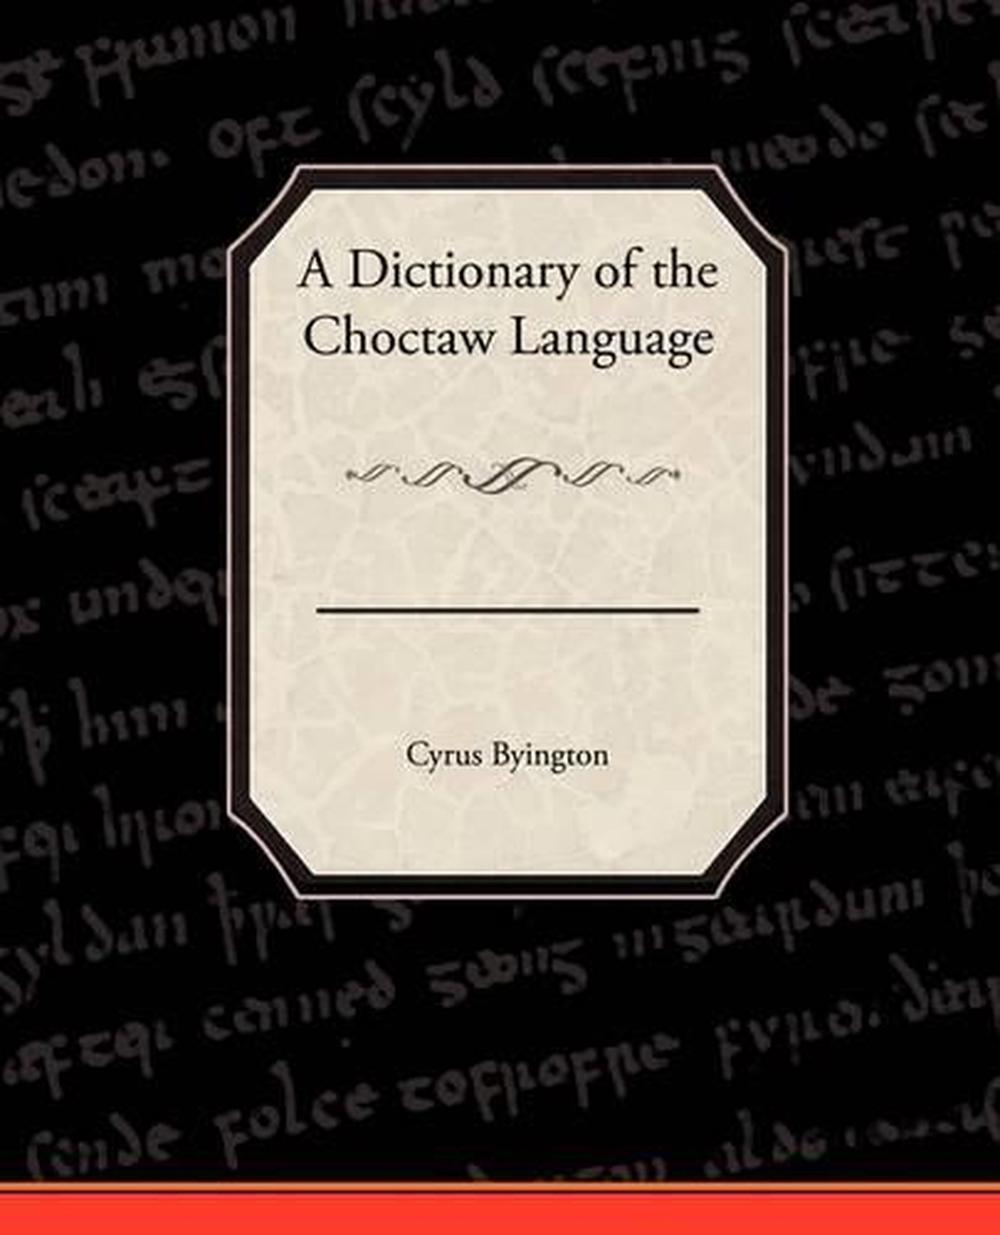 Choctaw Language and Culture by Marcia Haag